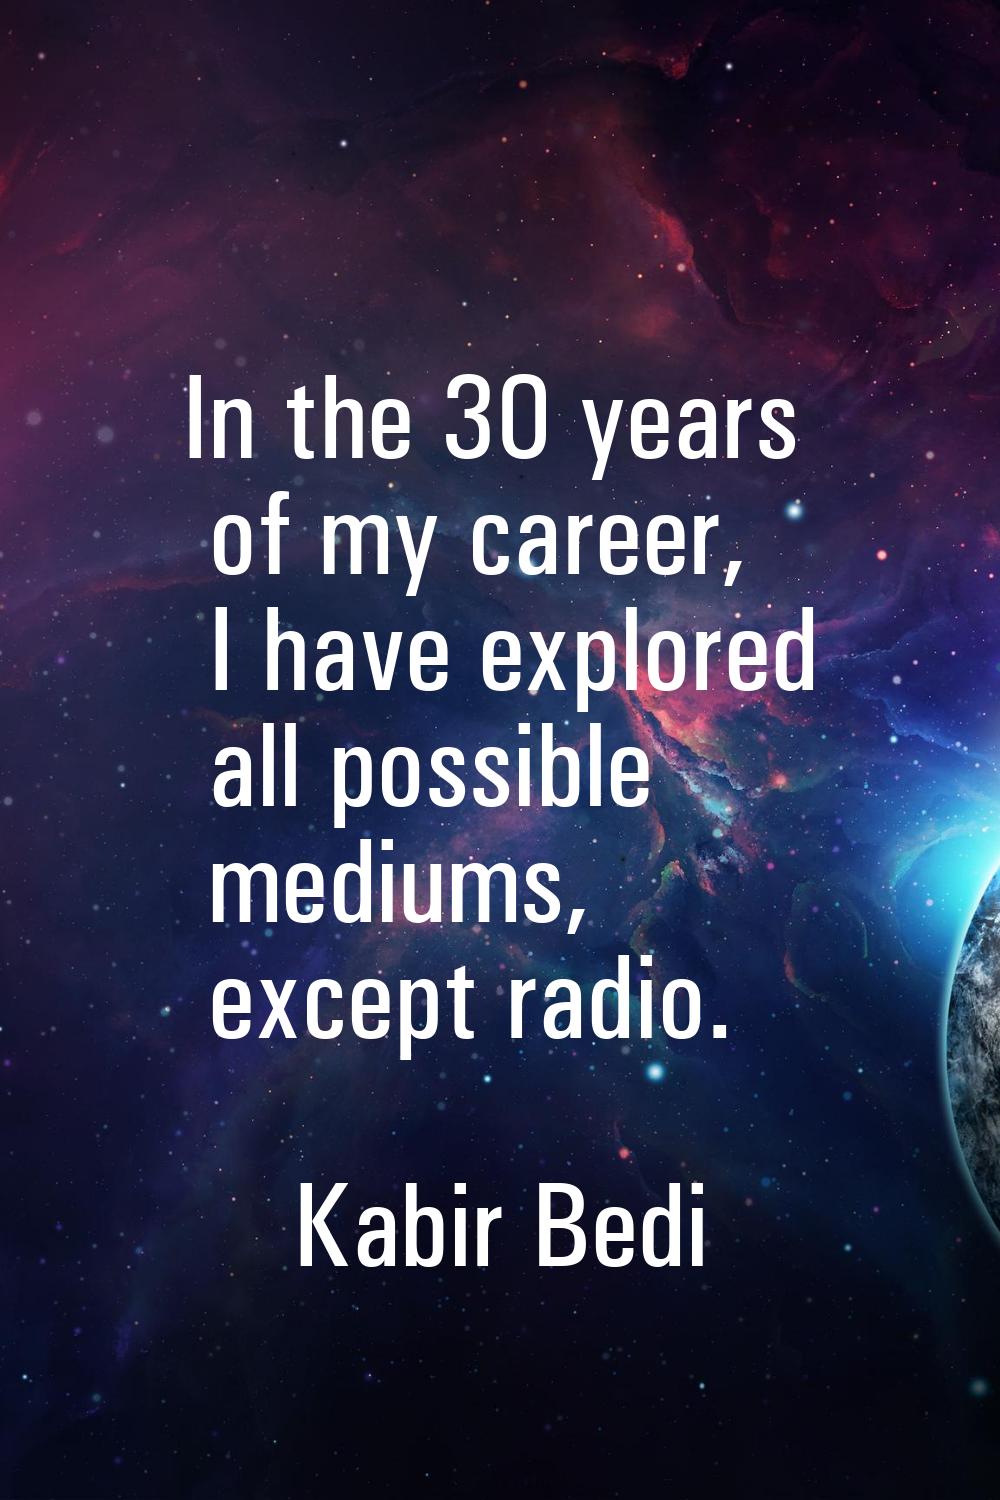 In the 30 years of my career, I have explored all possible mediums, except radio.